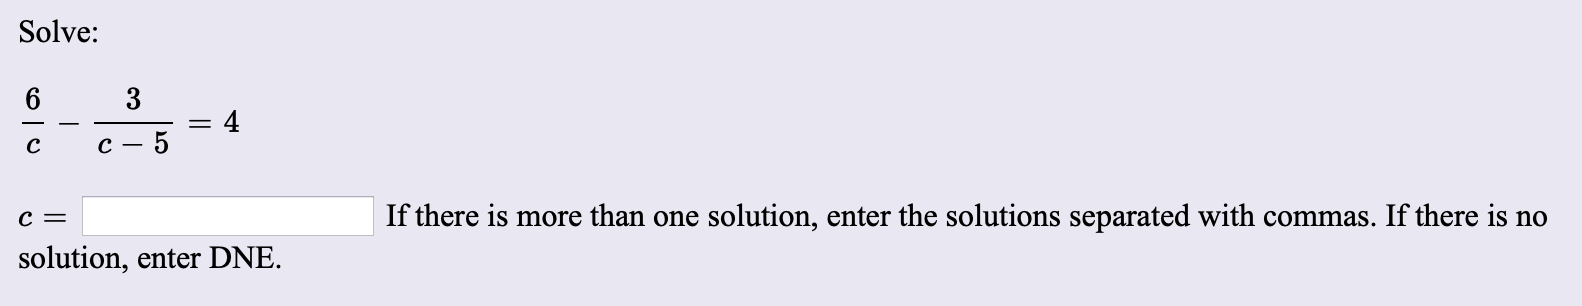 Solve:
6
3
5
If there is more than one solution, enter the solutions separated with commas. If there is no
solution, enter DNE.
